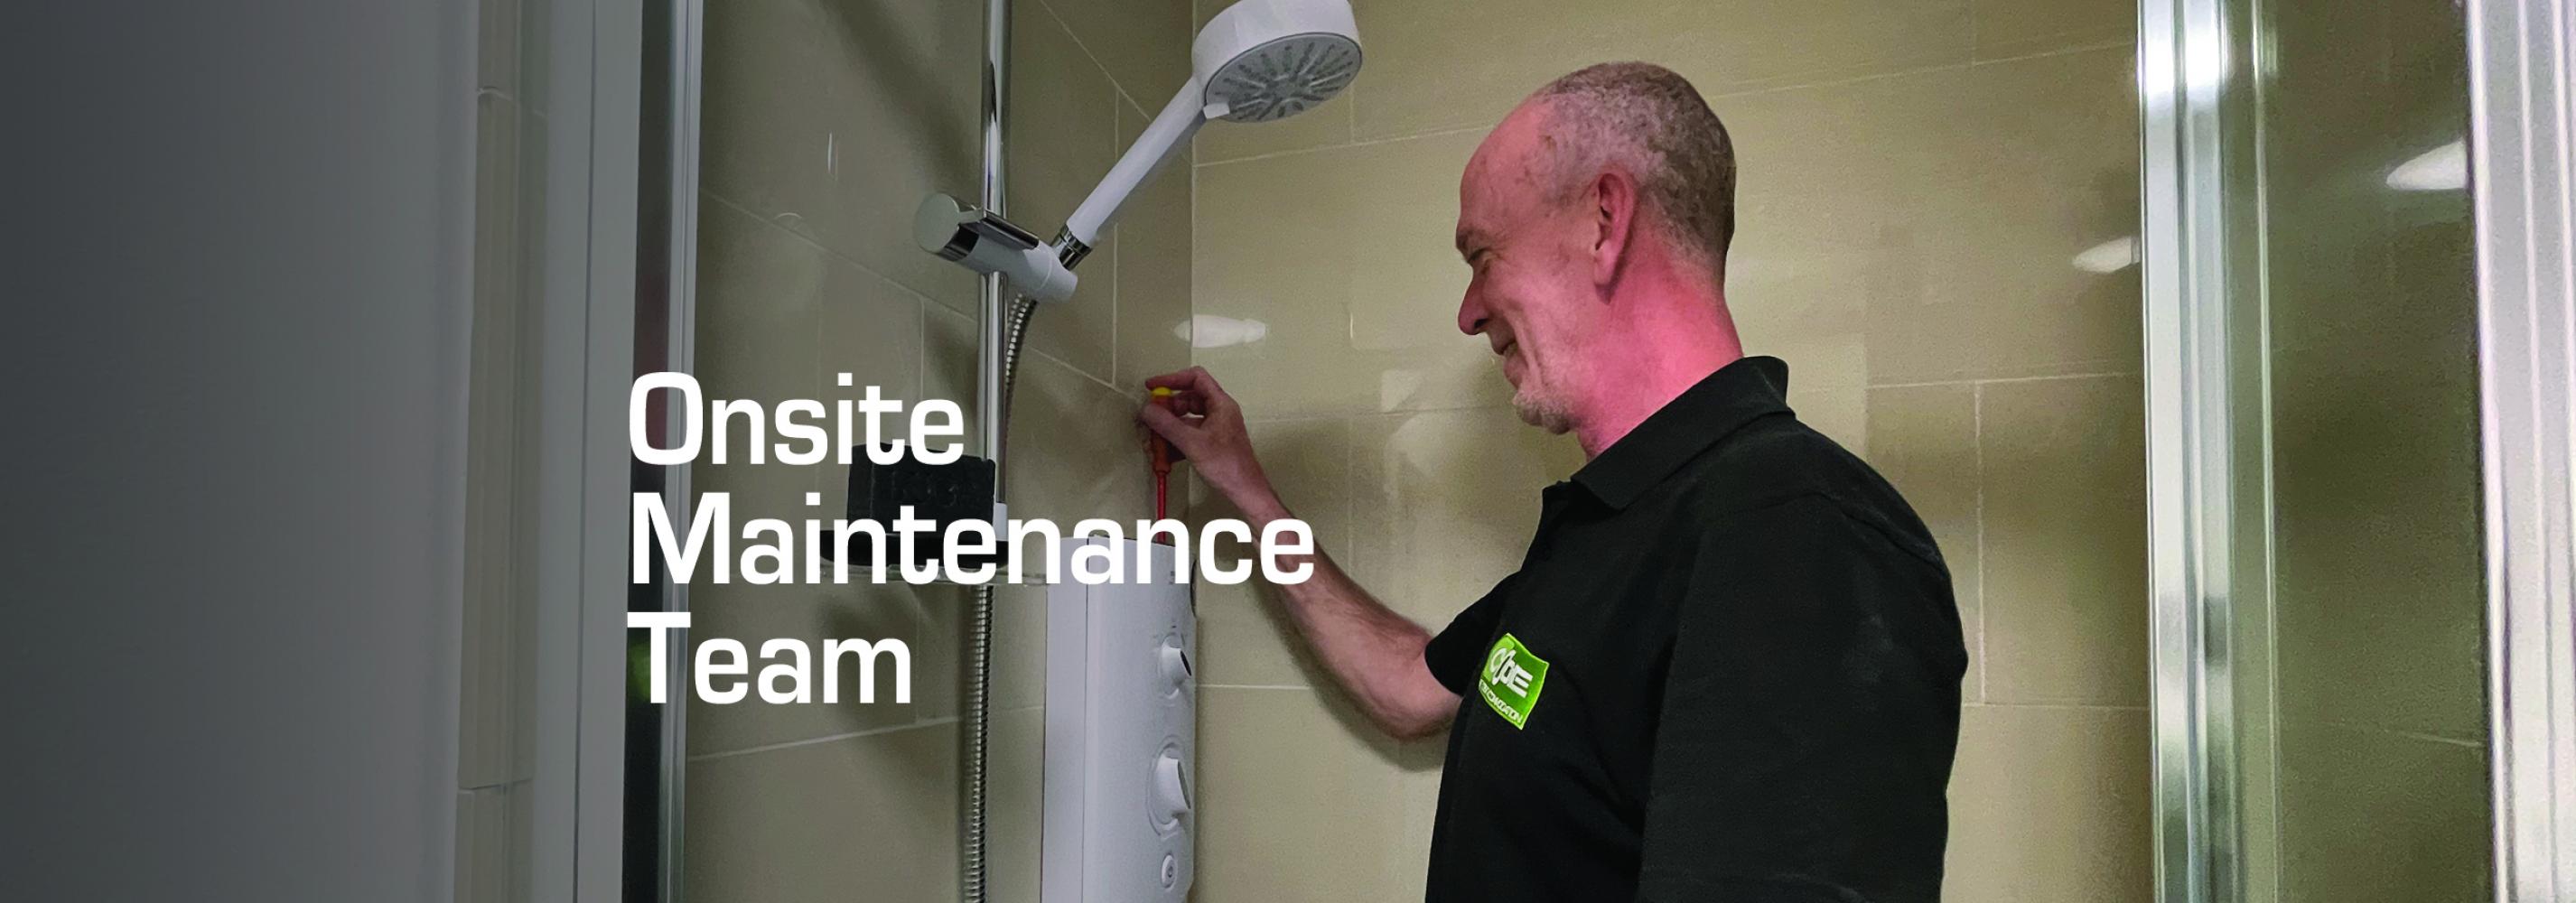 Our on-site maintenance team are on hand to solve any small issues